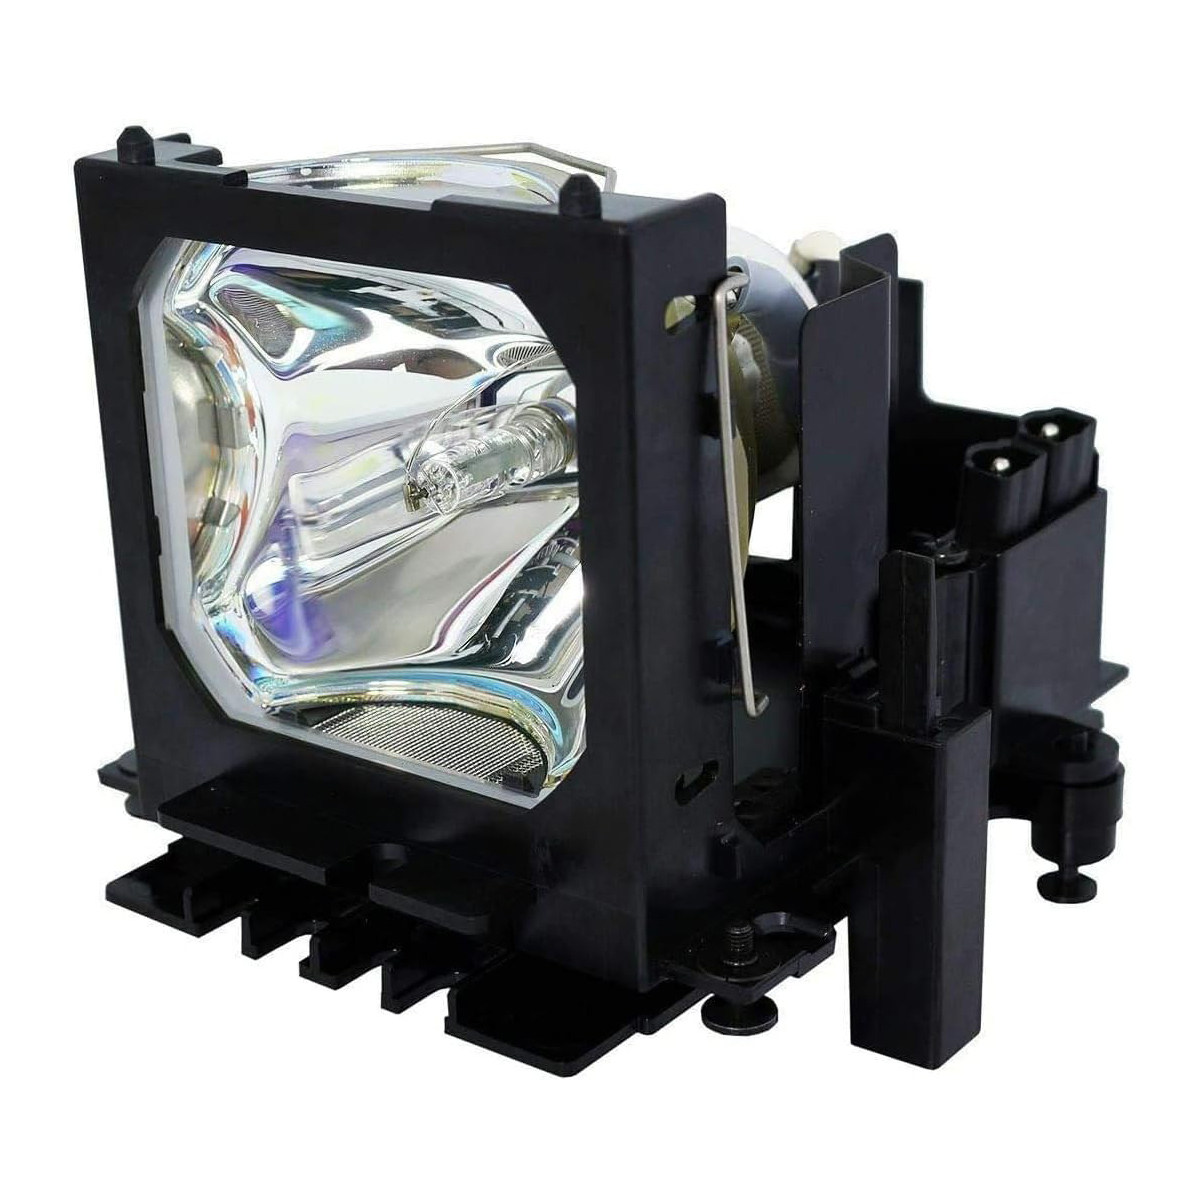 Replacement Projector lamp 78-6969-9718-4 For 3M X70